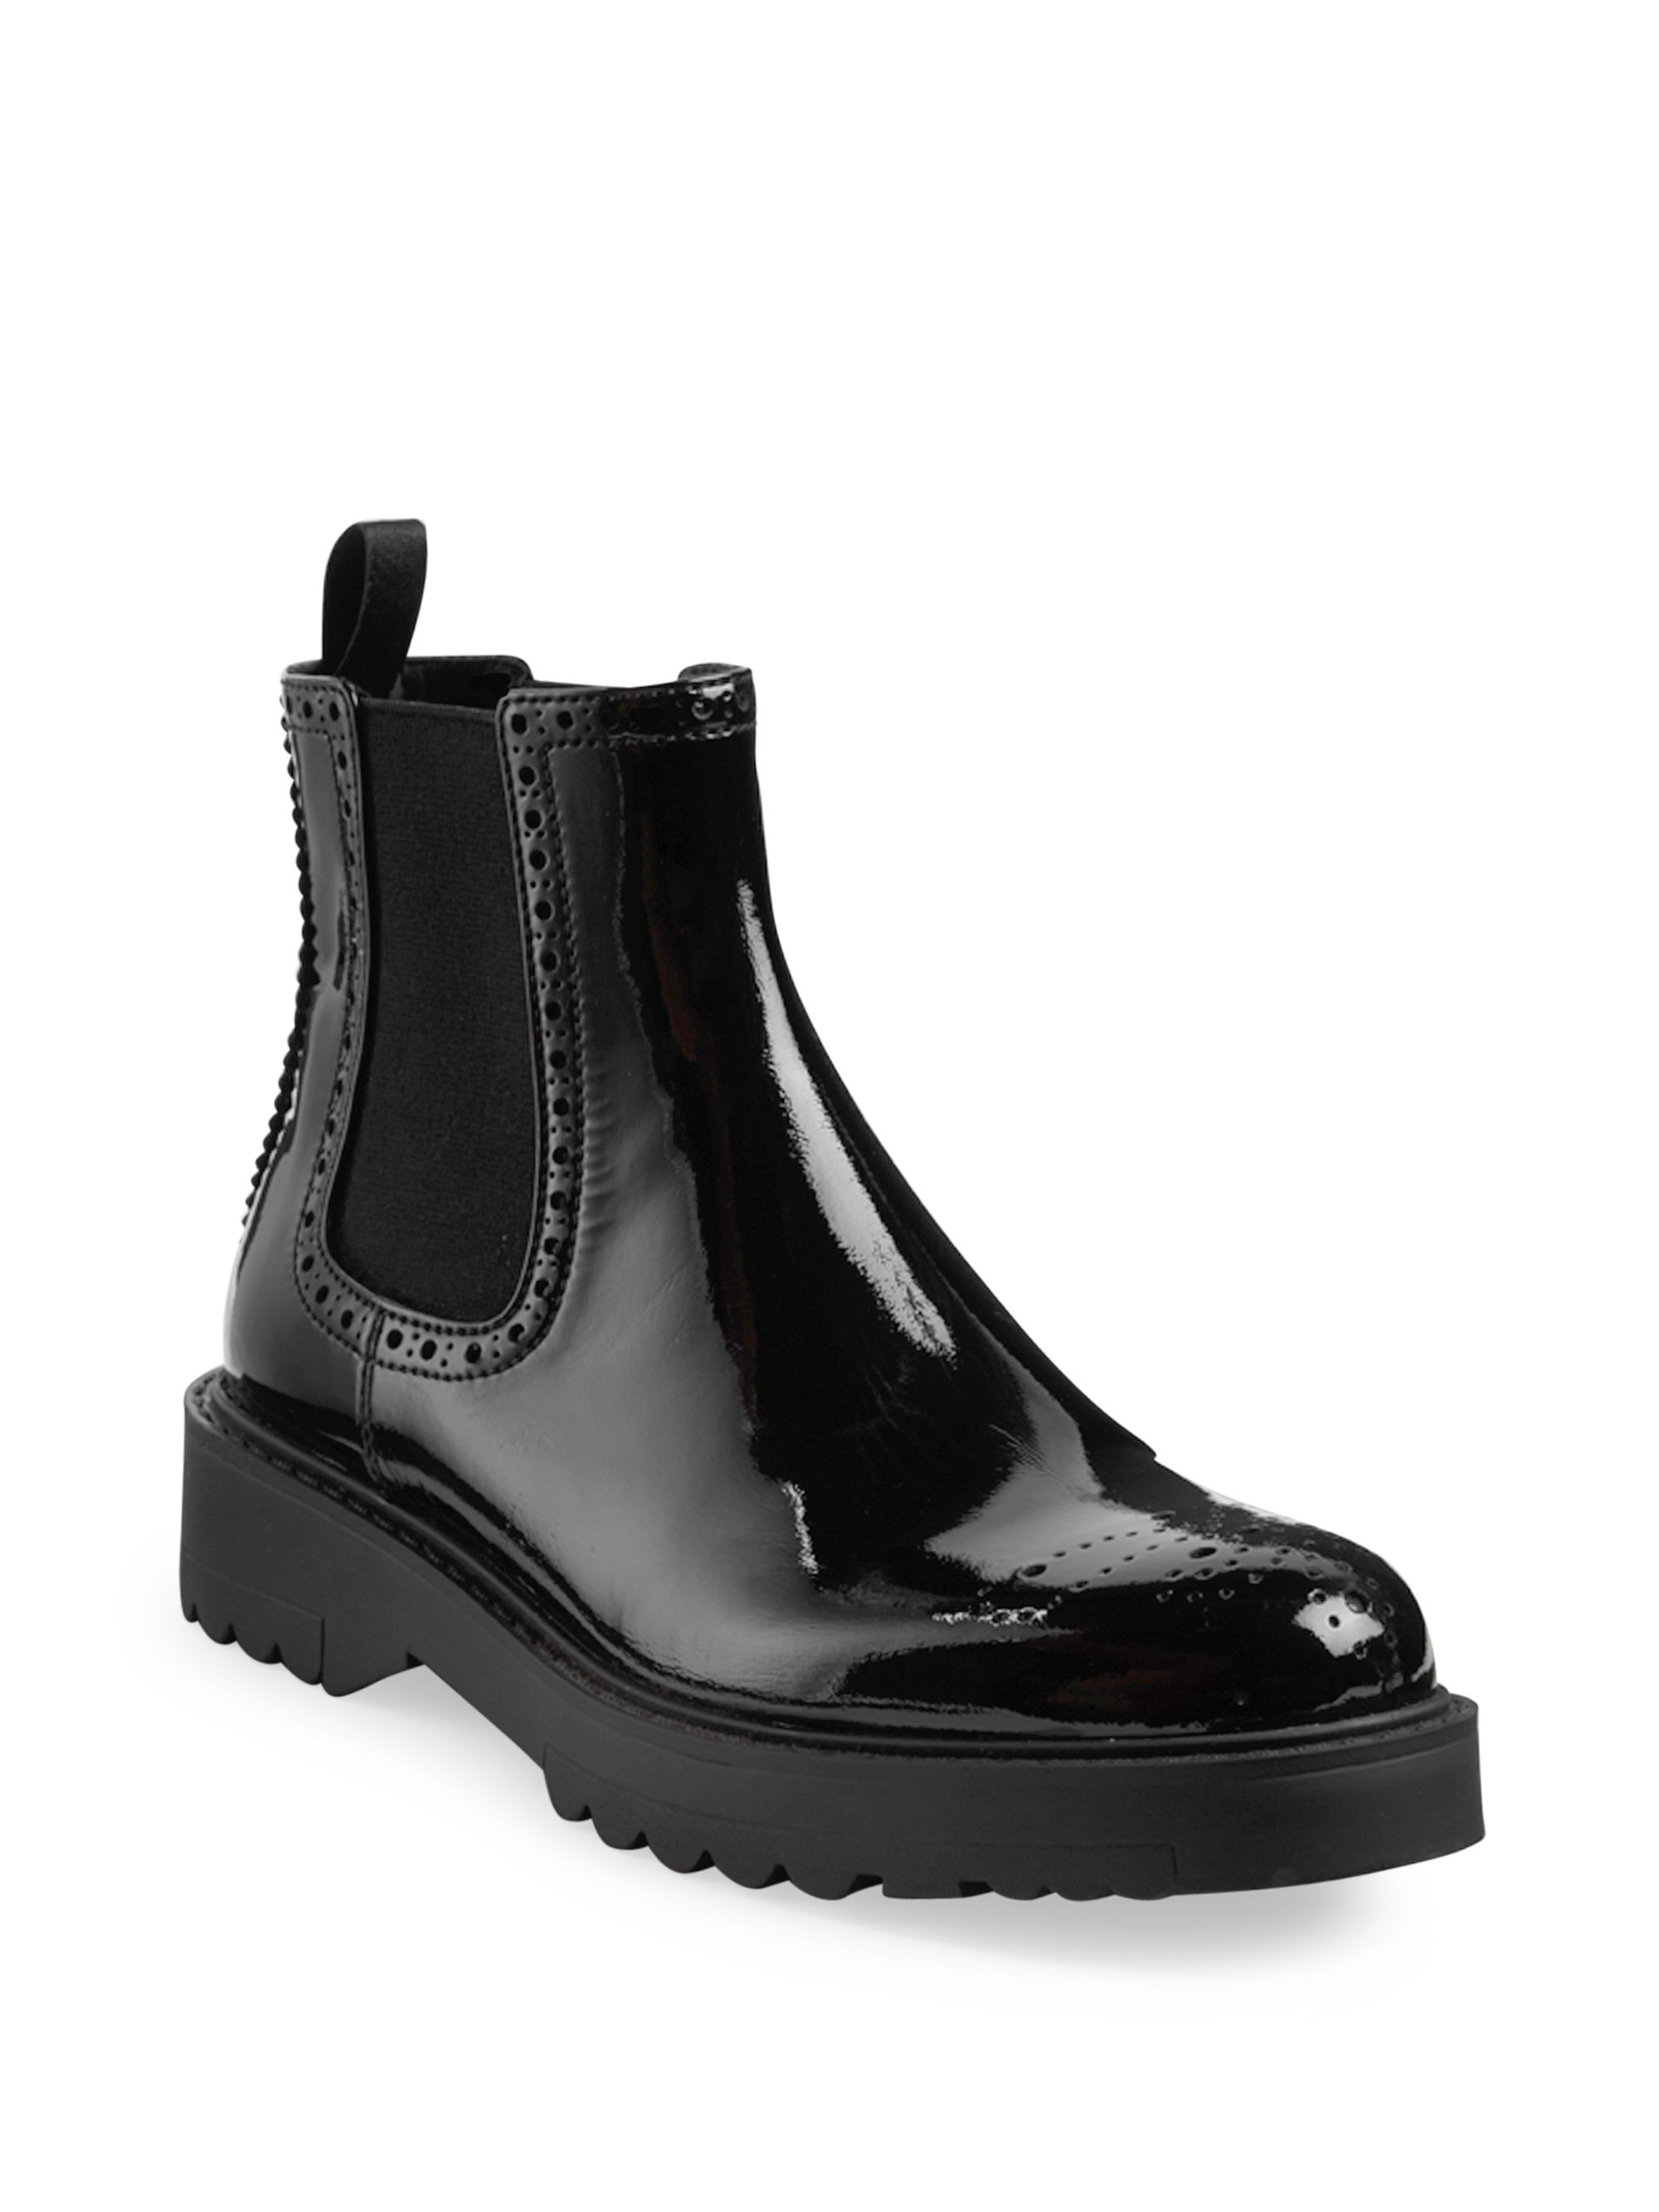 Prada Patent Leather Brogue Chelsea Boots in Black | Lyst